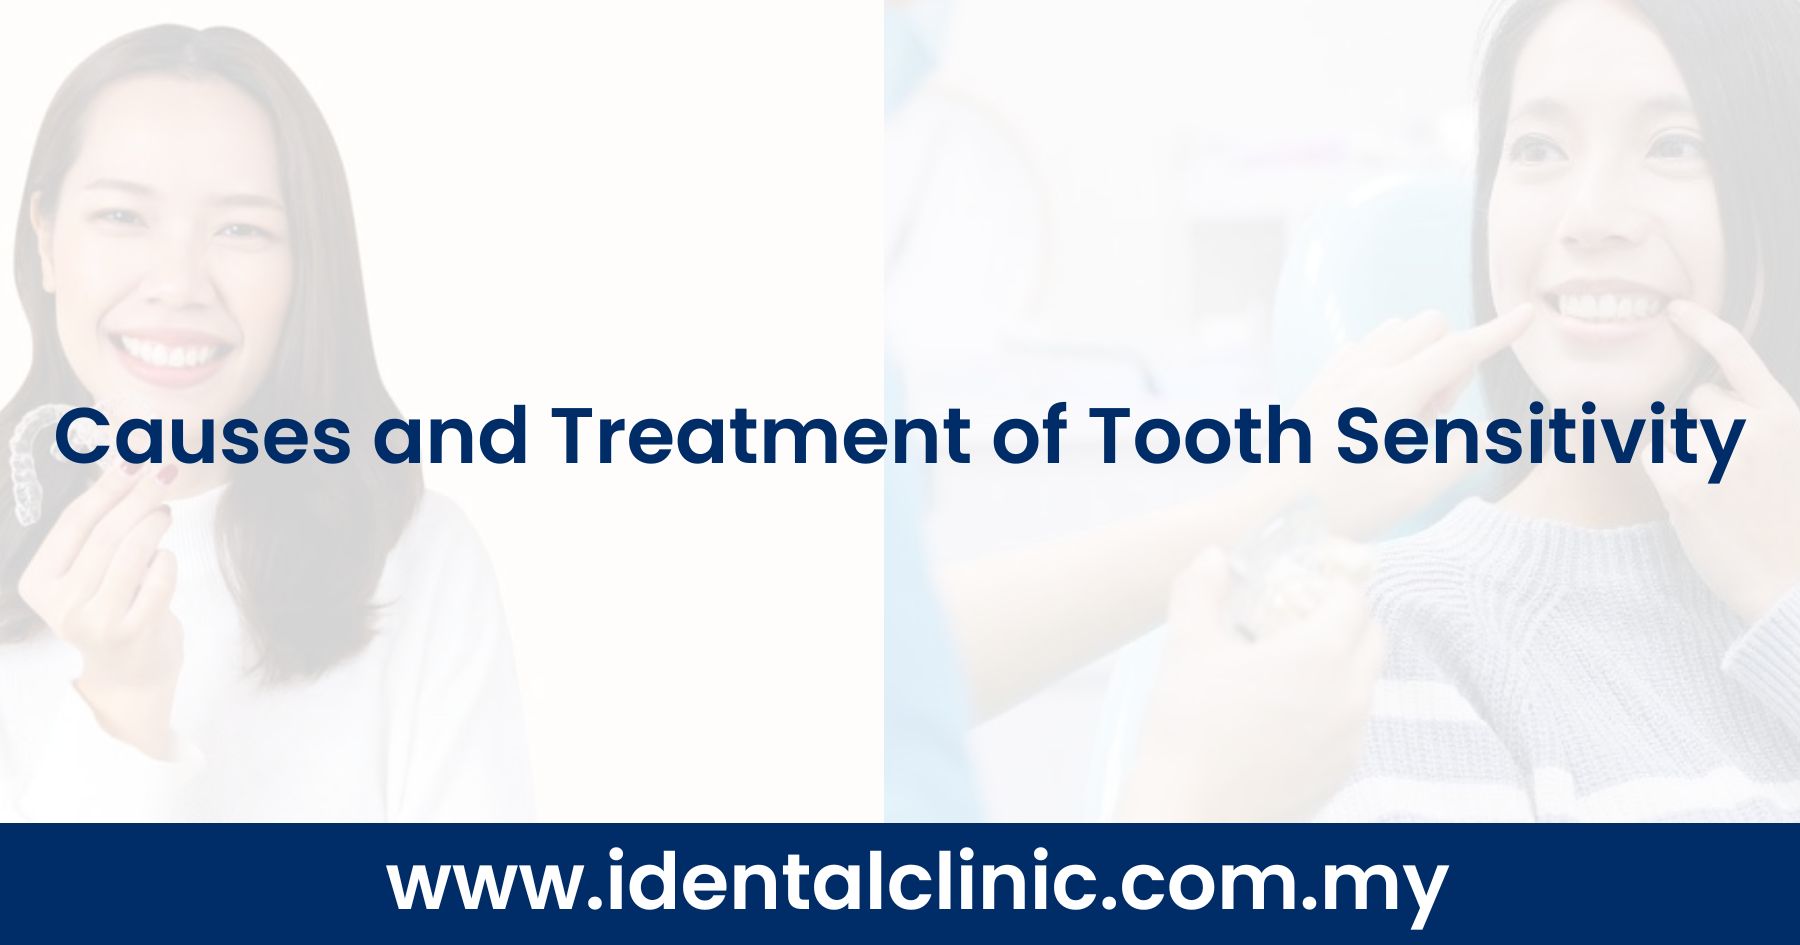 Causes and Treatment of Tooth Sensitivity